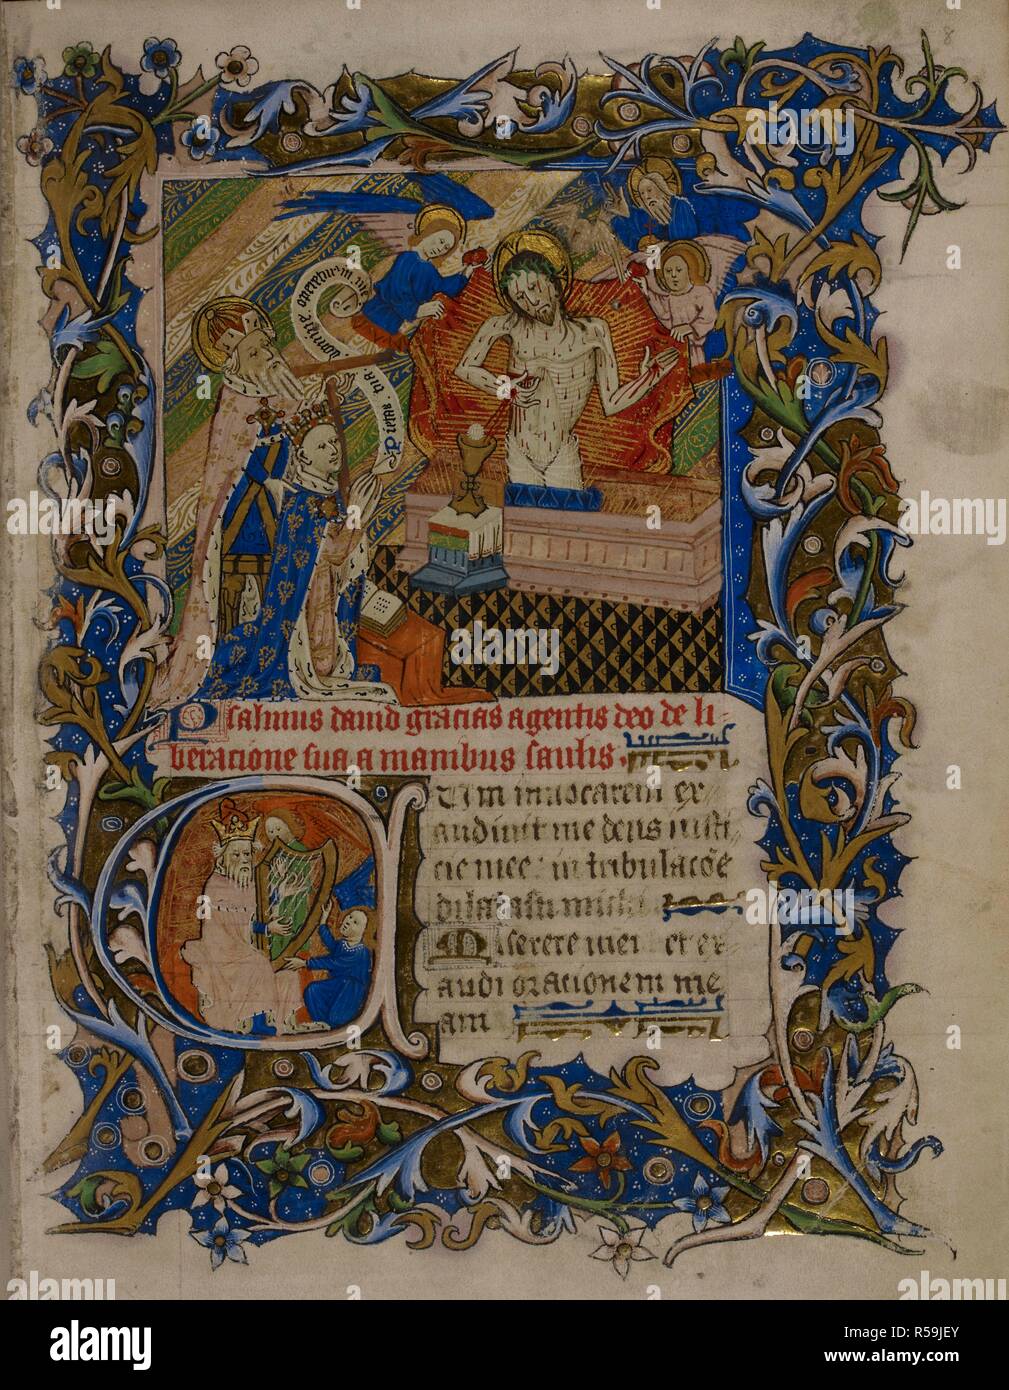 Commendation scene. Alban holding a Tau-cross, presenting a kneeling young king (perhaps Henry VI) with a scroll. Figure of Christ. Selection of psaolms, litanies and prayers for Humphey (Humfrey) of Gloucester. England, c. 1420 - c. 1440. Source: Royal 2 B. I, f.8. Stock Photo